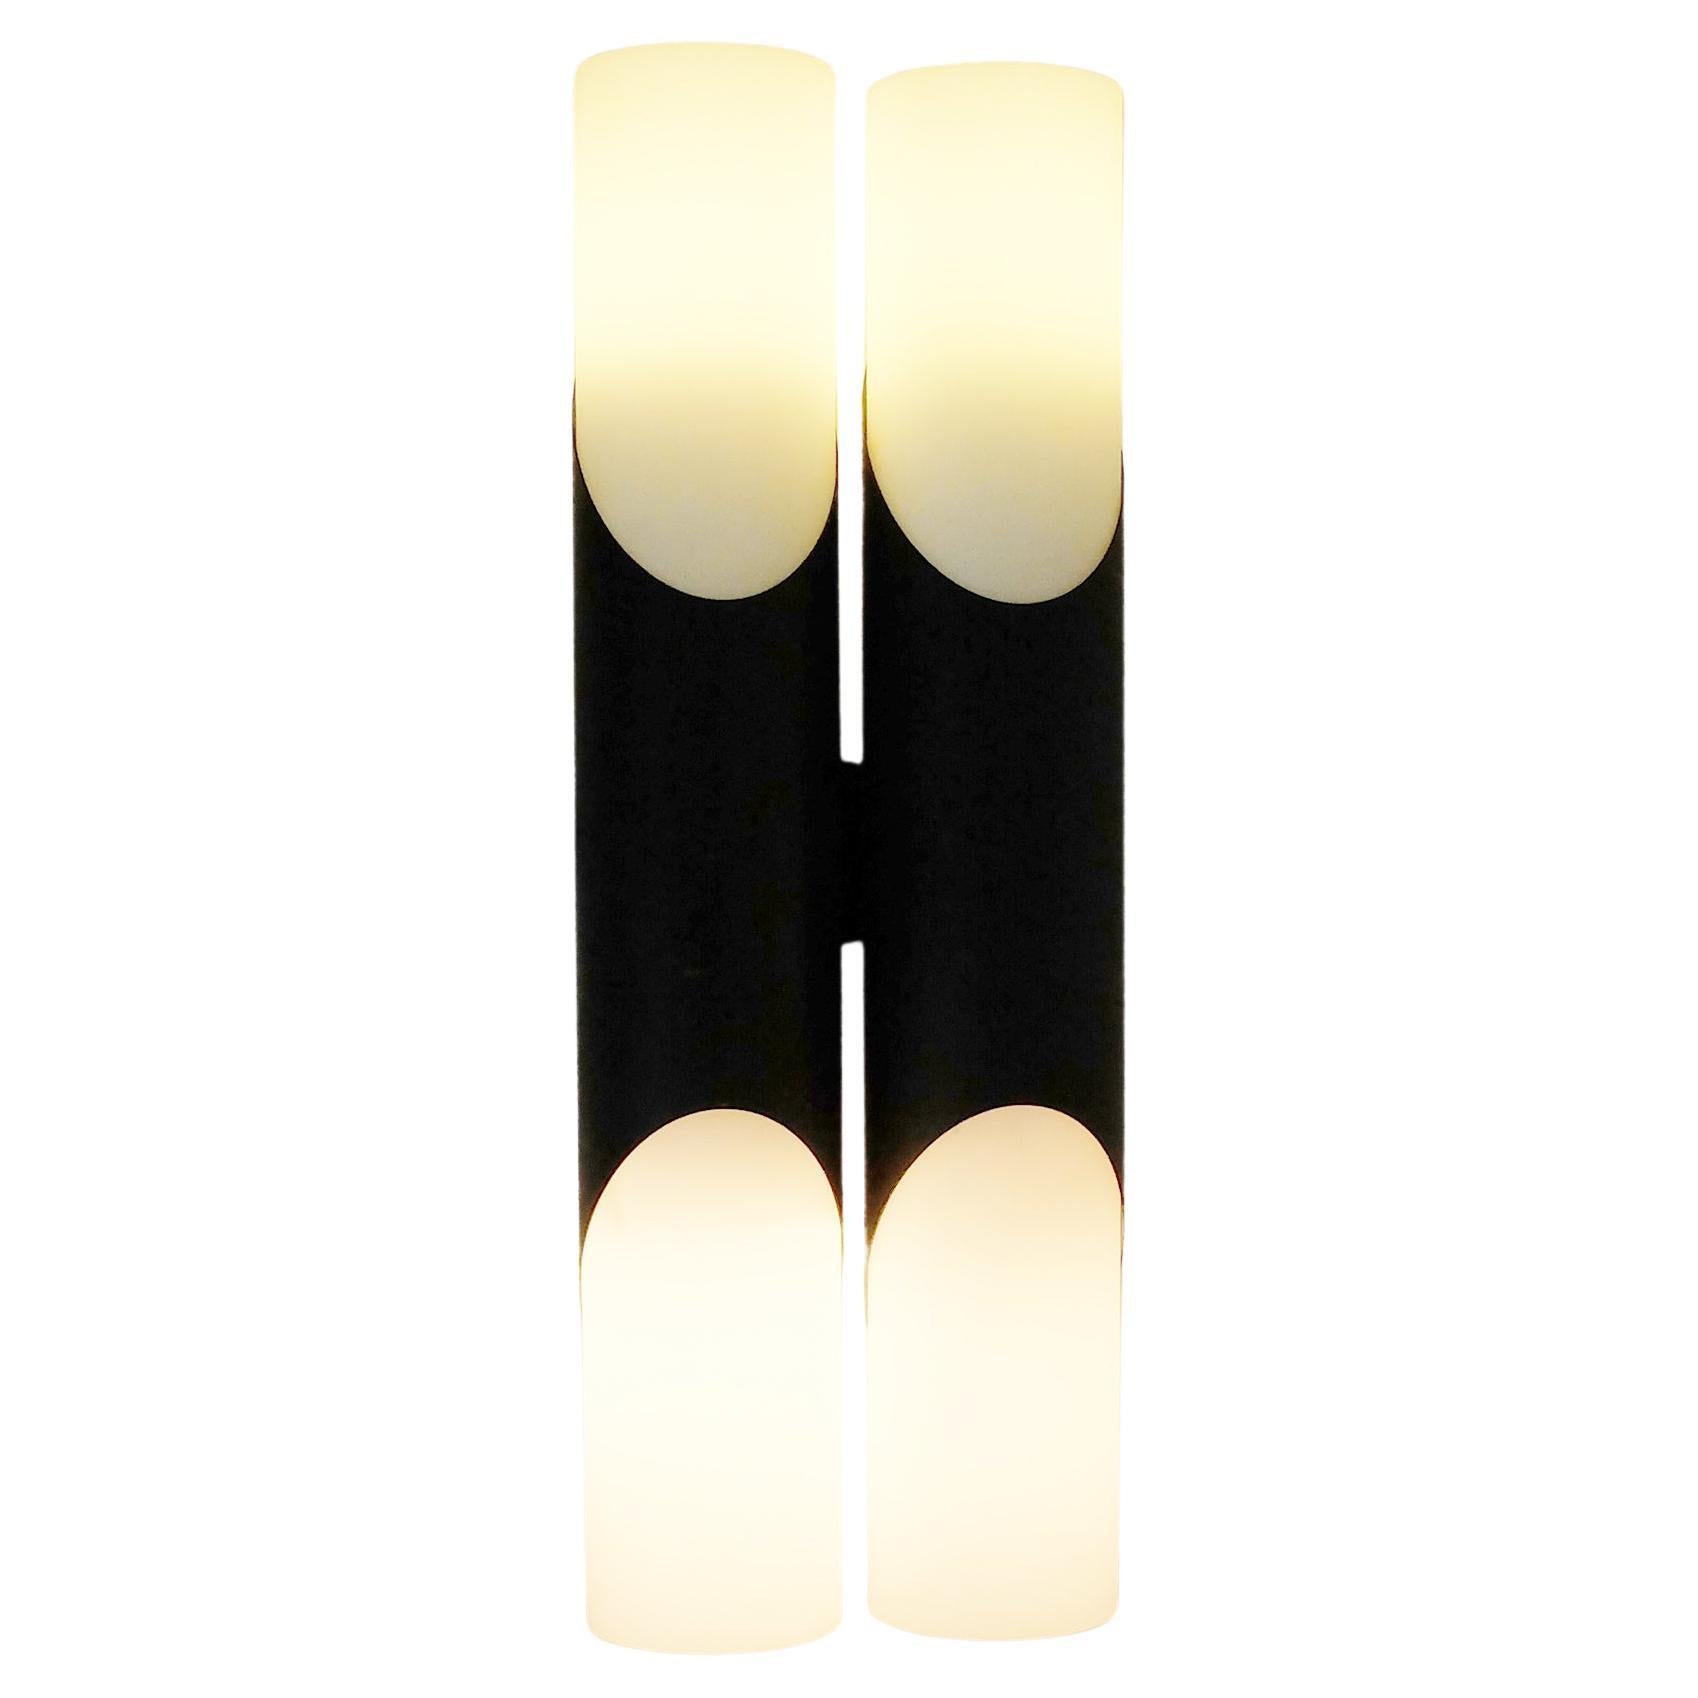 Double Glass Wall Light in black by Rolf Krüger for Paul Neuhaus, Germany 1970 For Sale